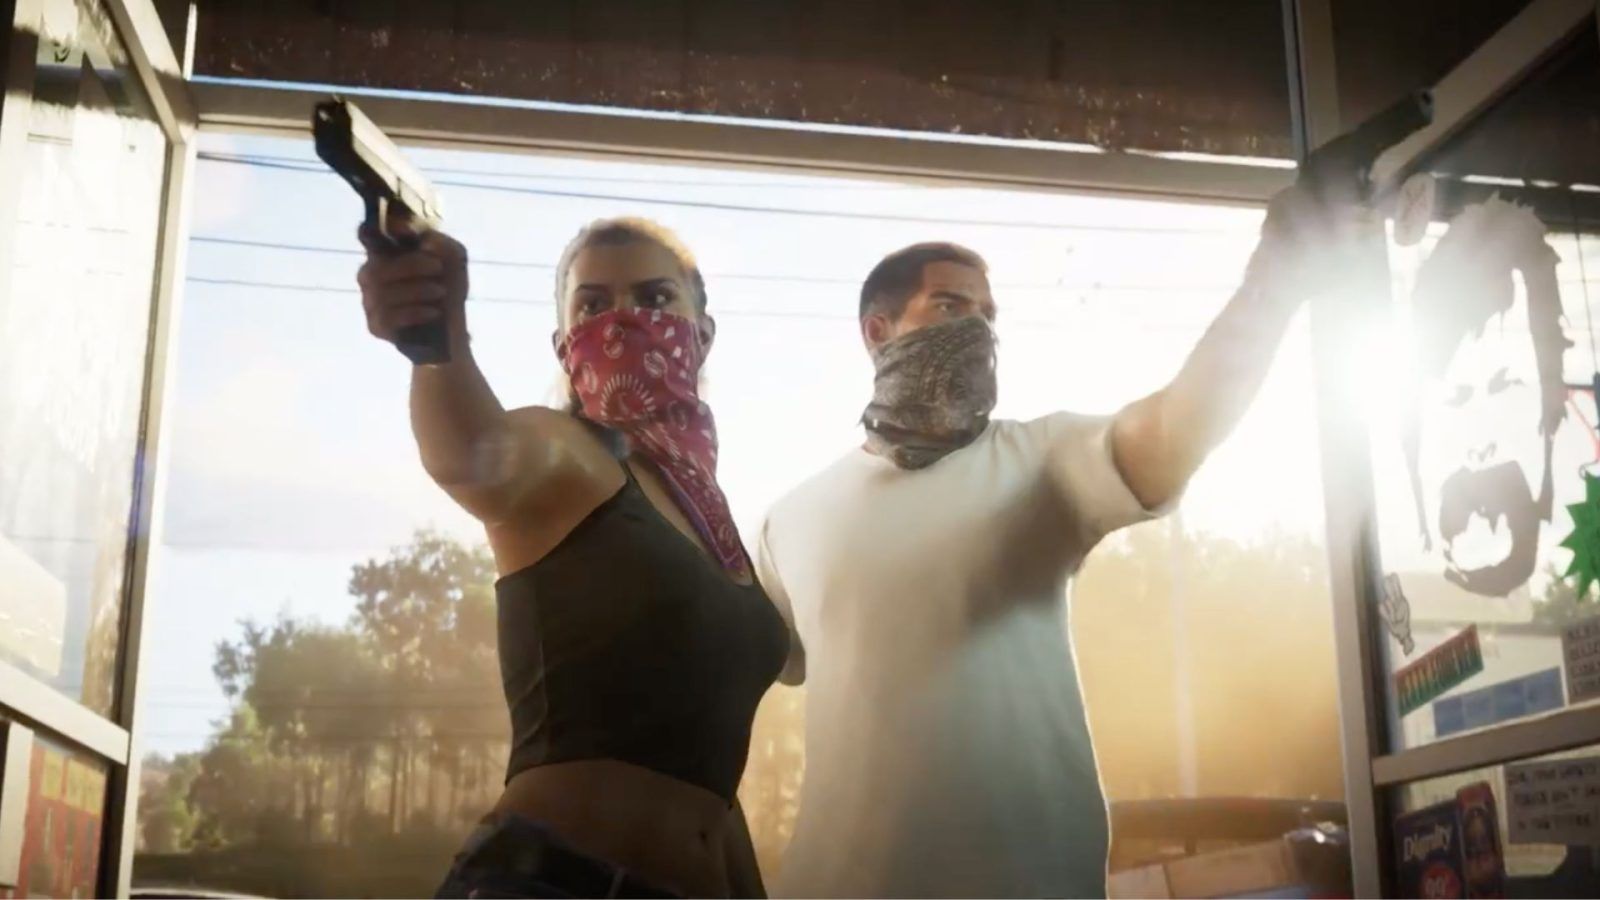 GTA VI from Rockstar Games: Trailer, characters, plot and more details